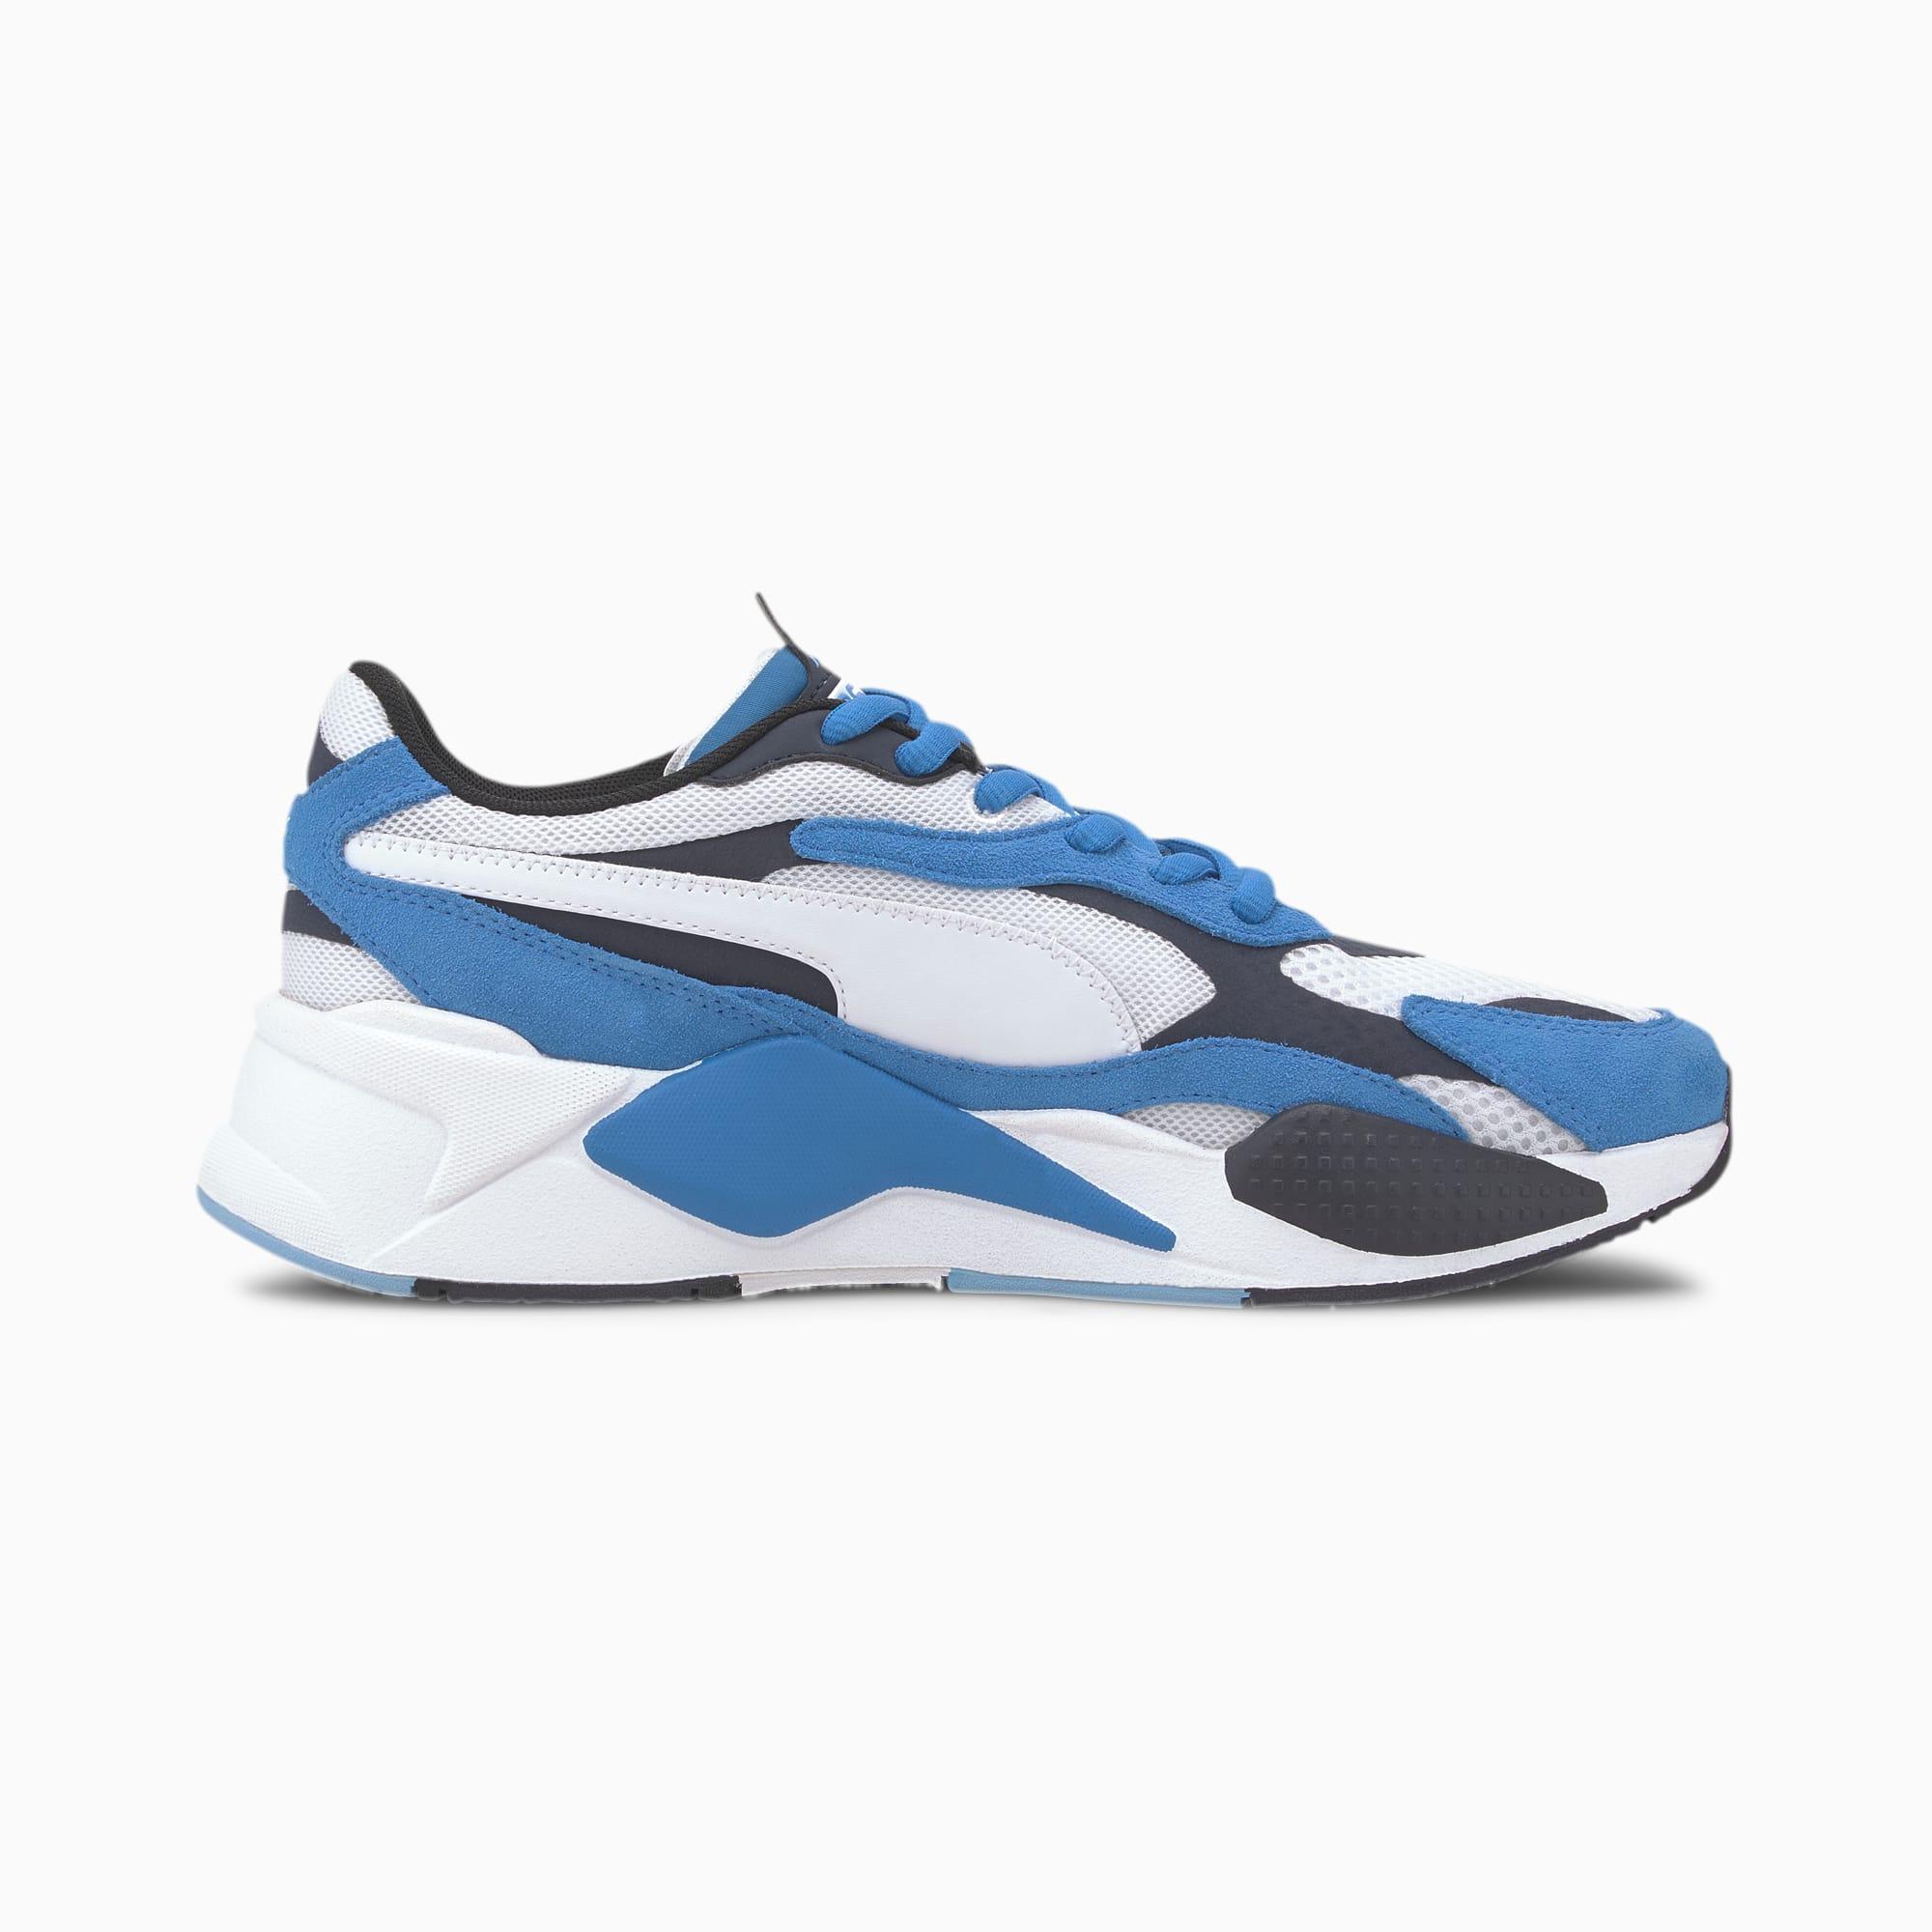 PUMA Suede Rs-x3 Super Sneakers in Blue for Men - Lyst